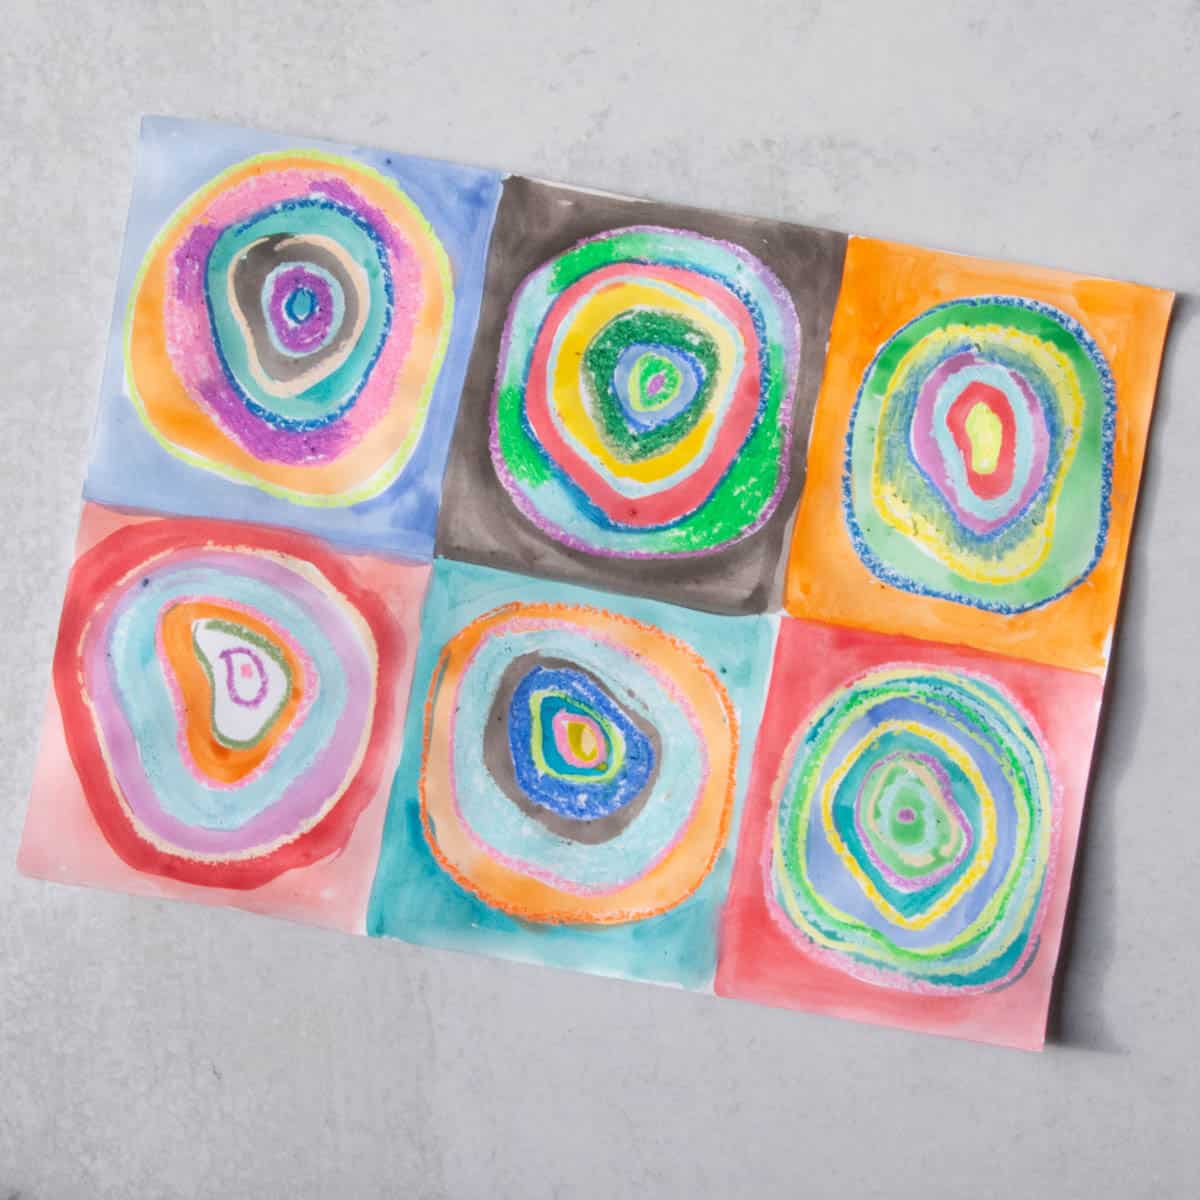 Abstract art with circles like Kandinsky's concentric circles.